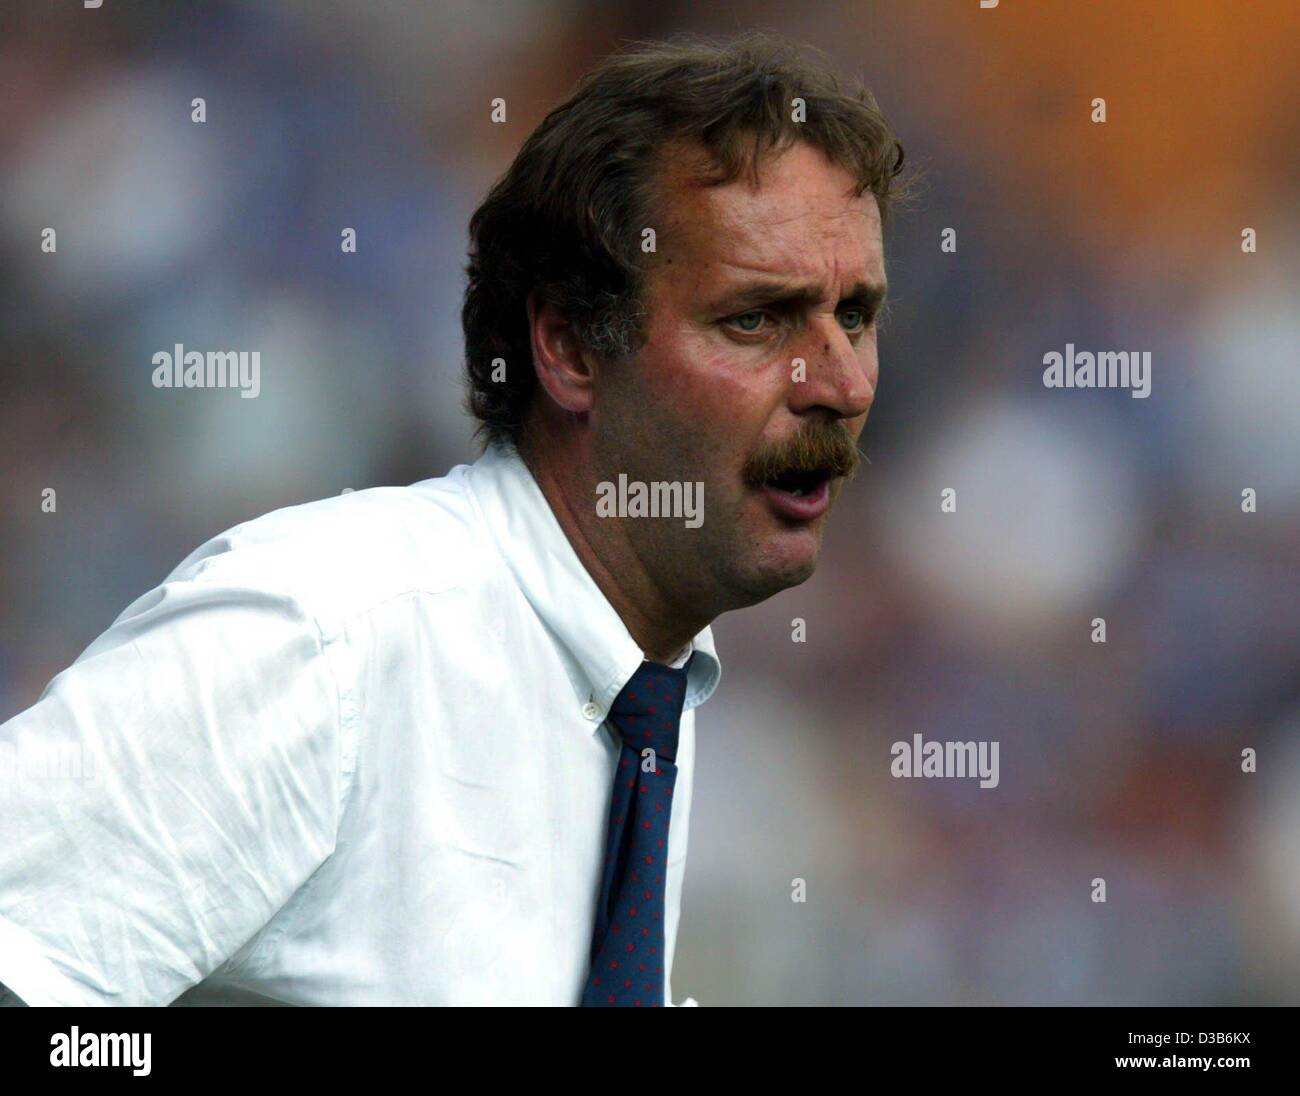 (dpa) - Peter Neururer, coach of the German soccer club VfL Bochum, watches tensely the match against Cottbus in Bochum, Germany, 17 August 2002. The match ended 5:0 for Bochum, putting Bochum at the top of the league table. Stock Photo